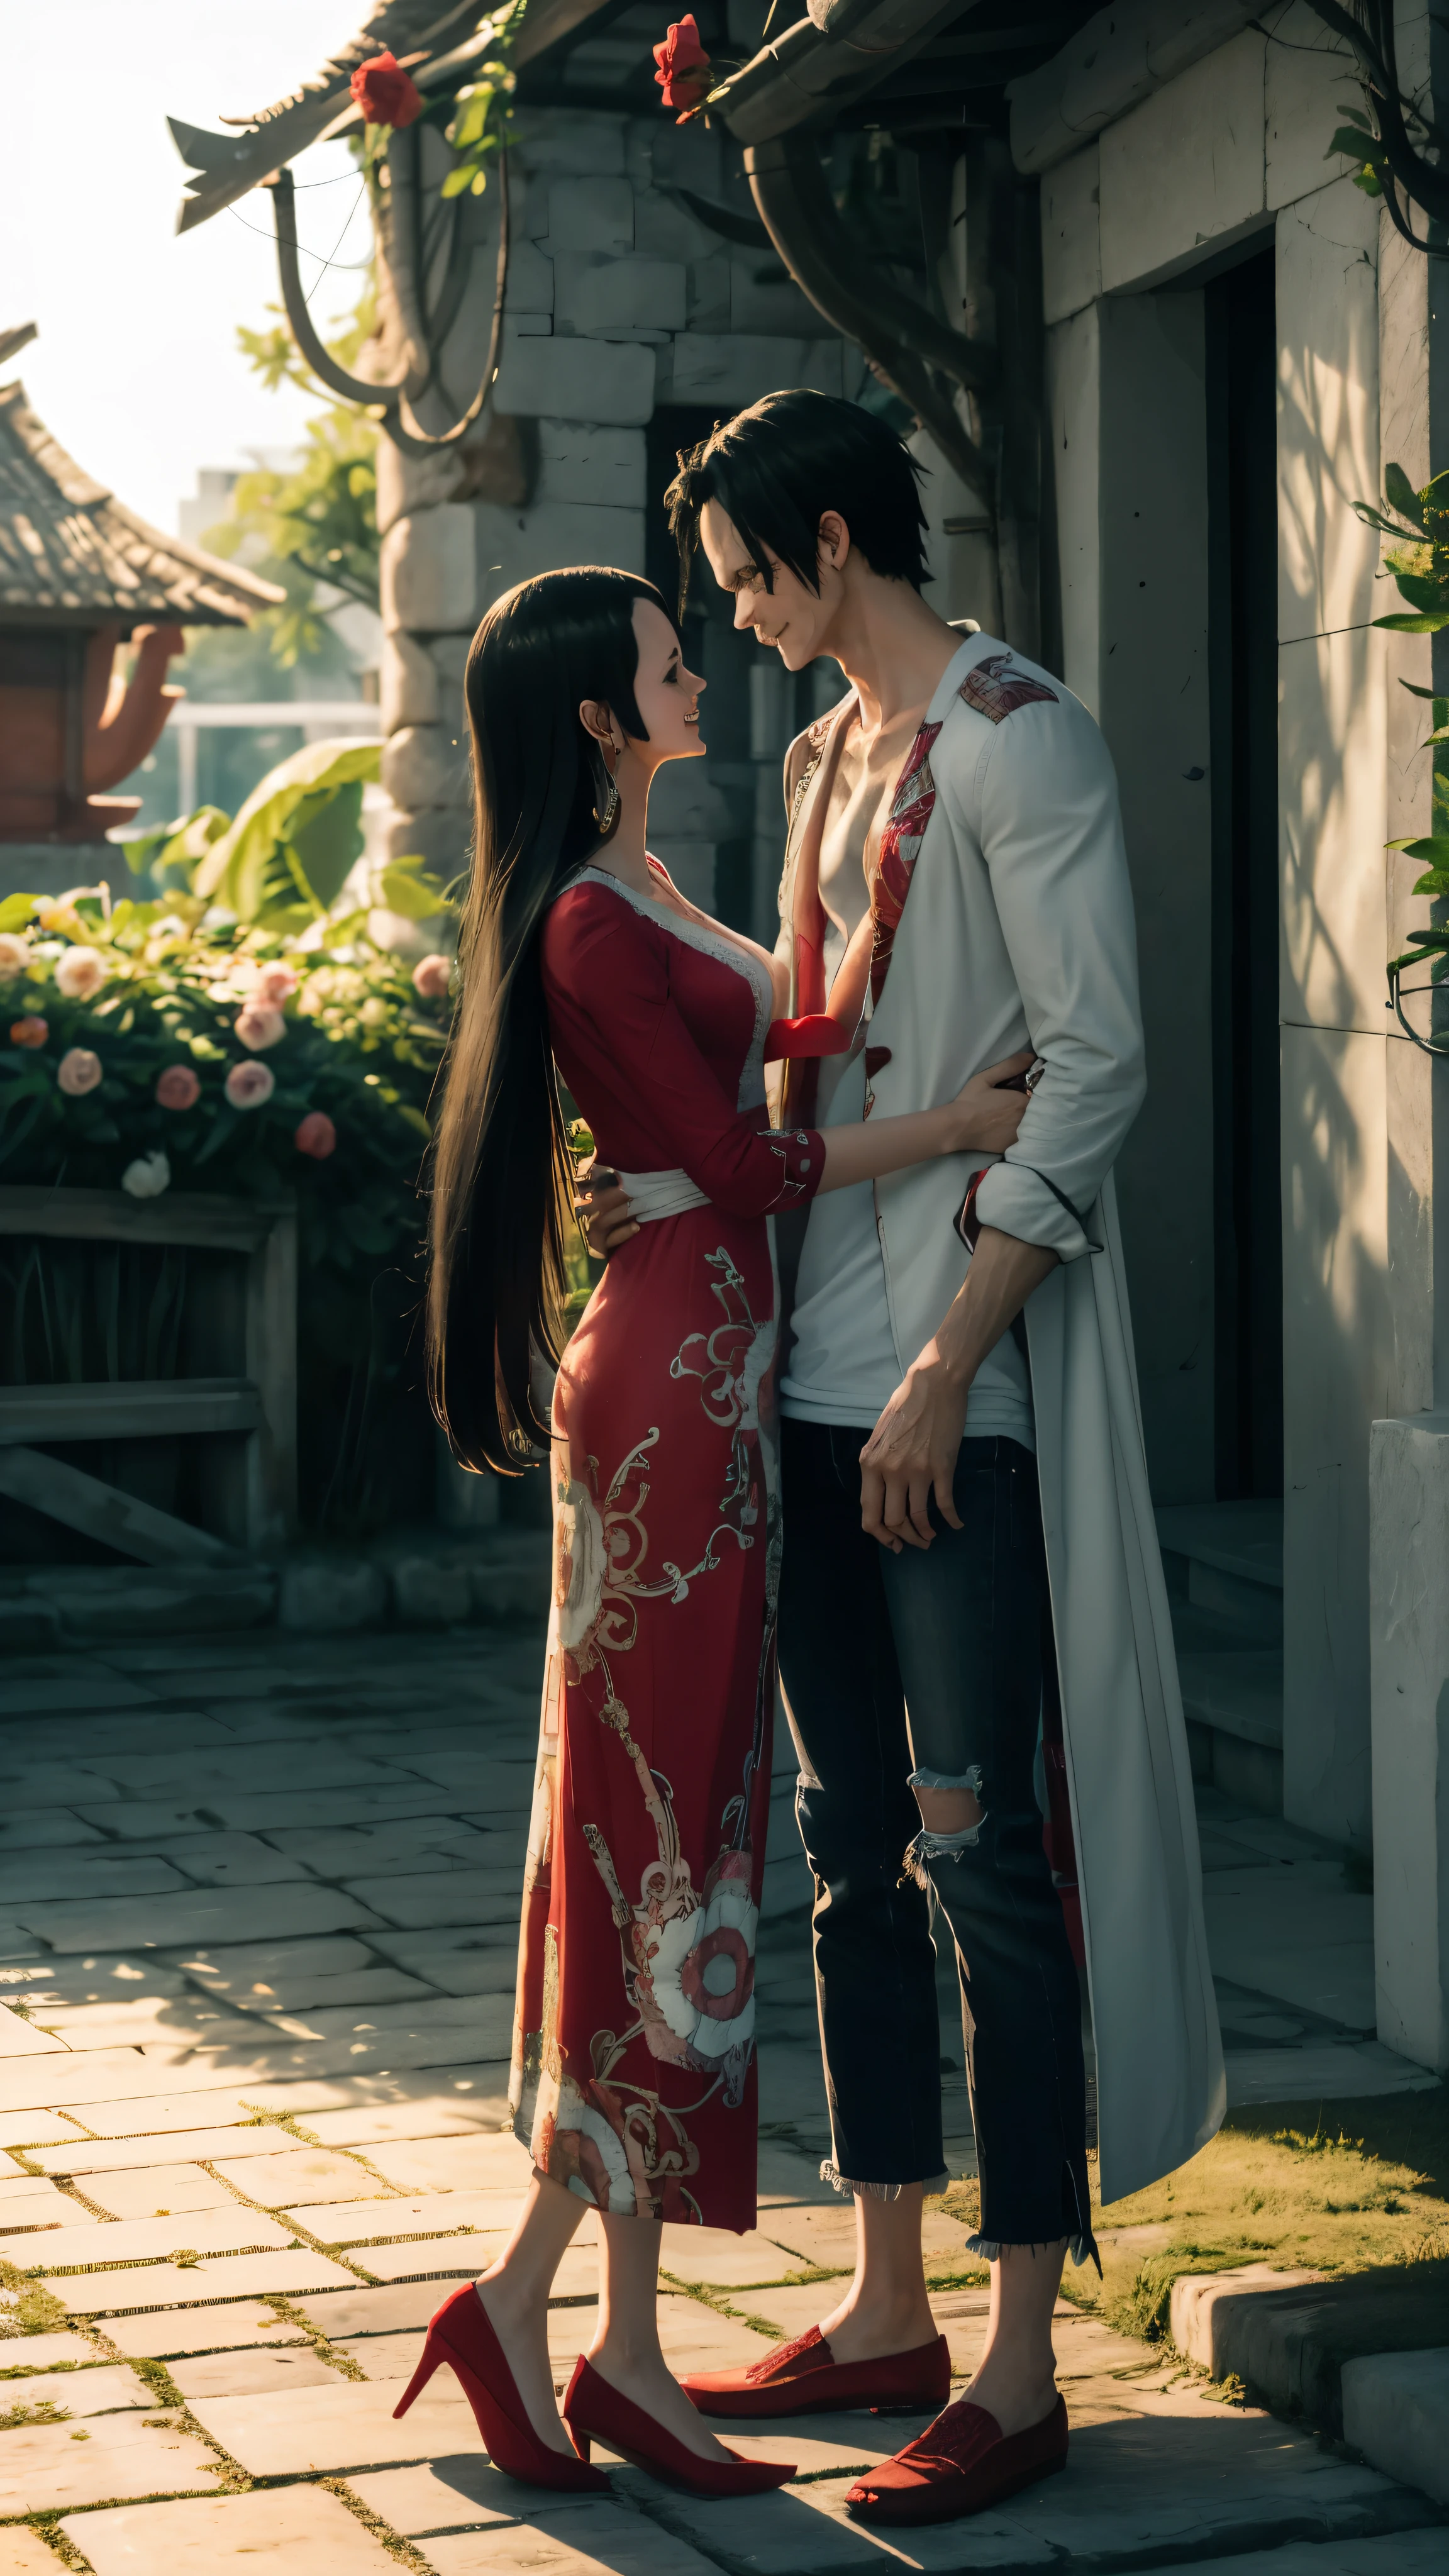 best quality, of romantic couple in amazing and idyllic landscape, romantic atmosphere, featured details; Man monkey d Luffy white T-shirt and denim coat, woman boa Hancock with long black hair, red dress with flowers and white shoes, radiant smile, in the light of the sunset kissing